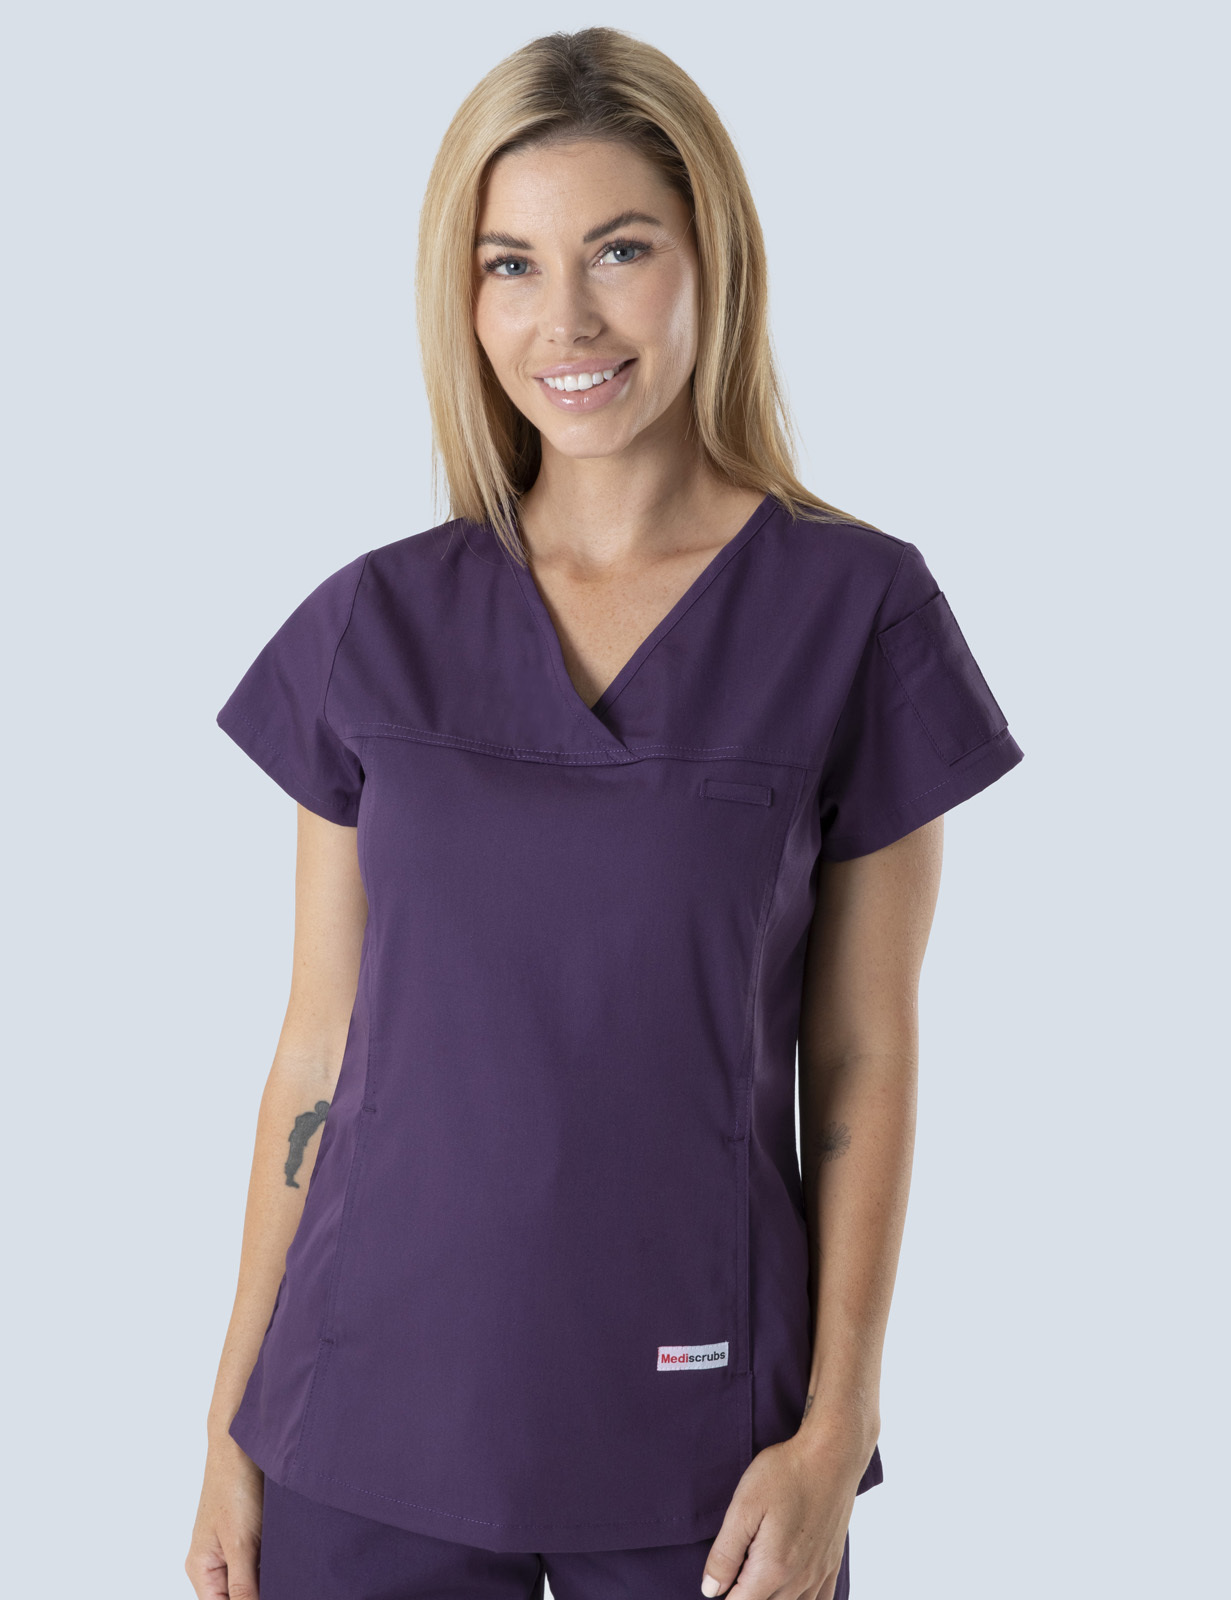 Mayfield Aged Care Team Leader Uniform Top Only Bundle ( Women's Fit Solid Top in Aubergine incl Logos)